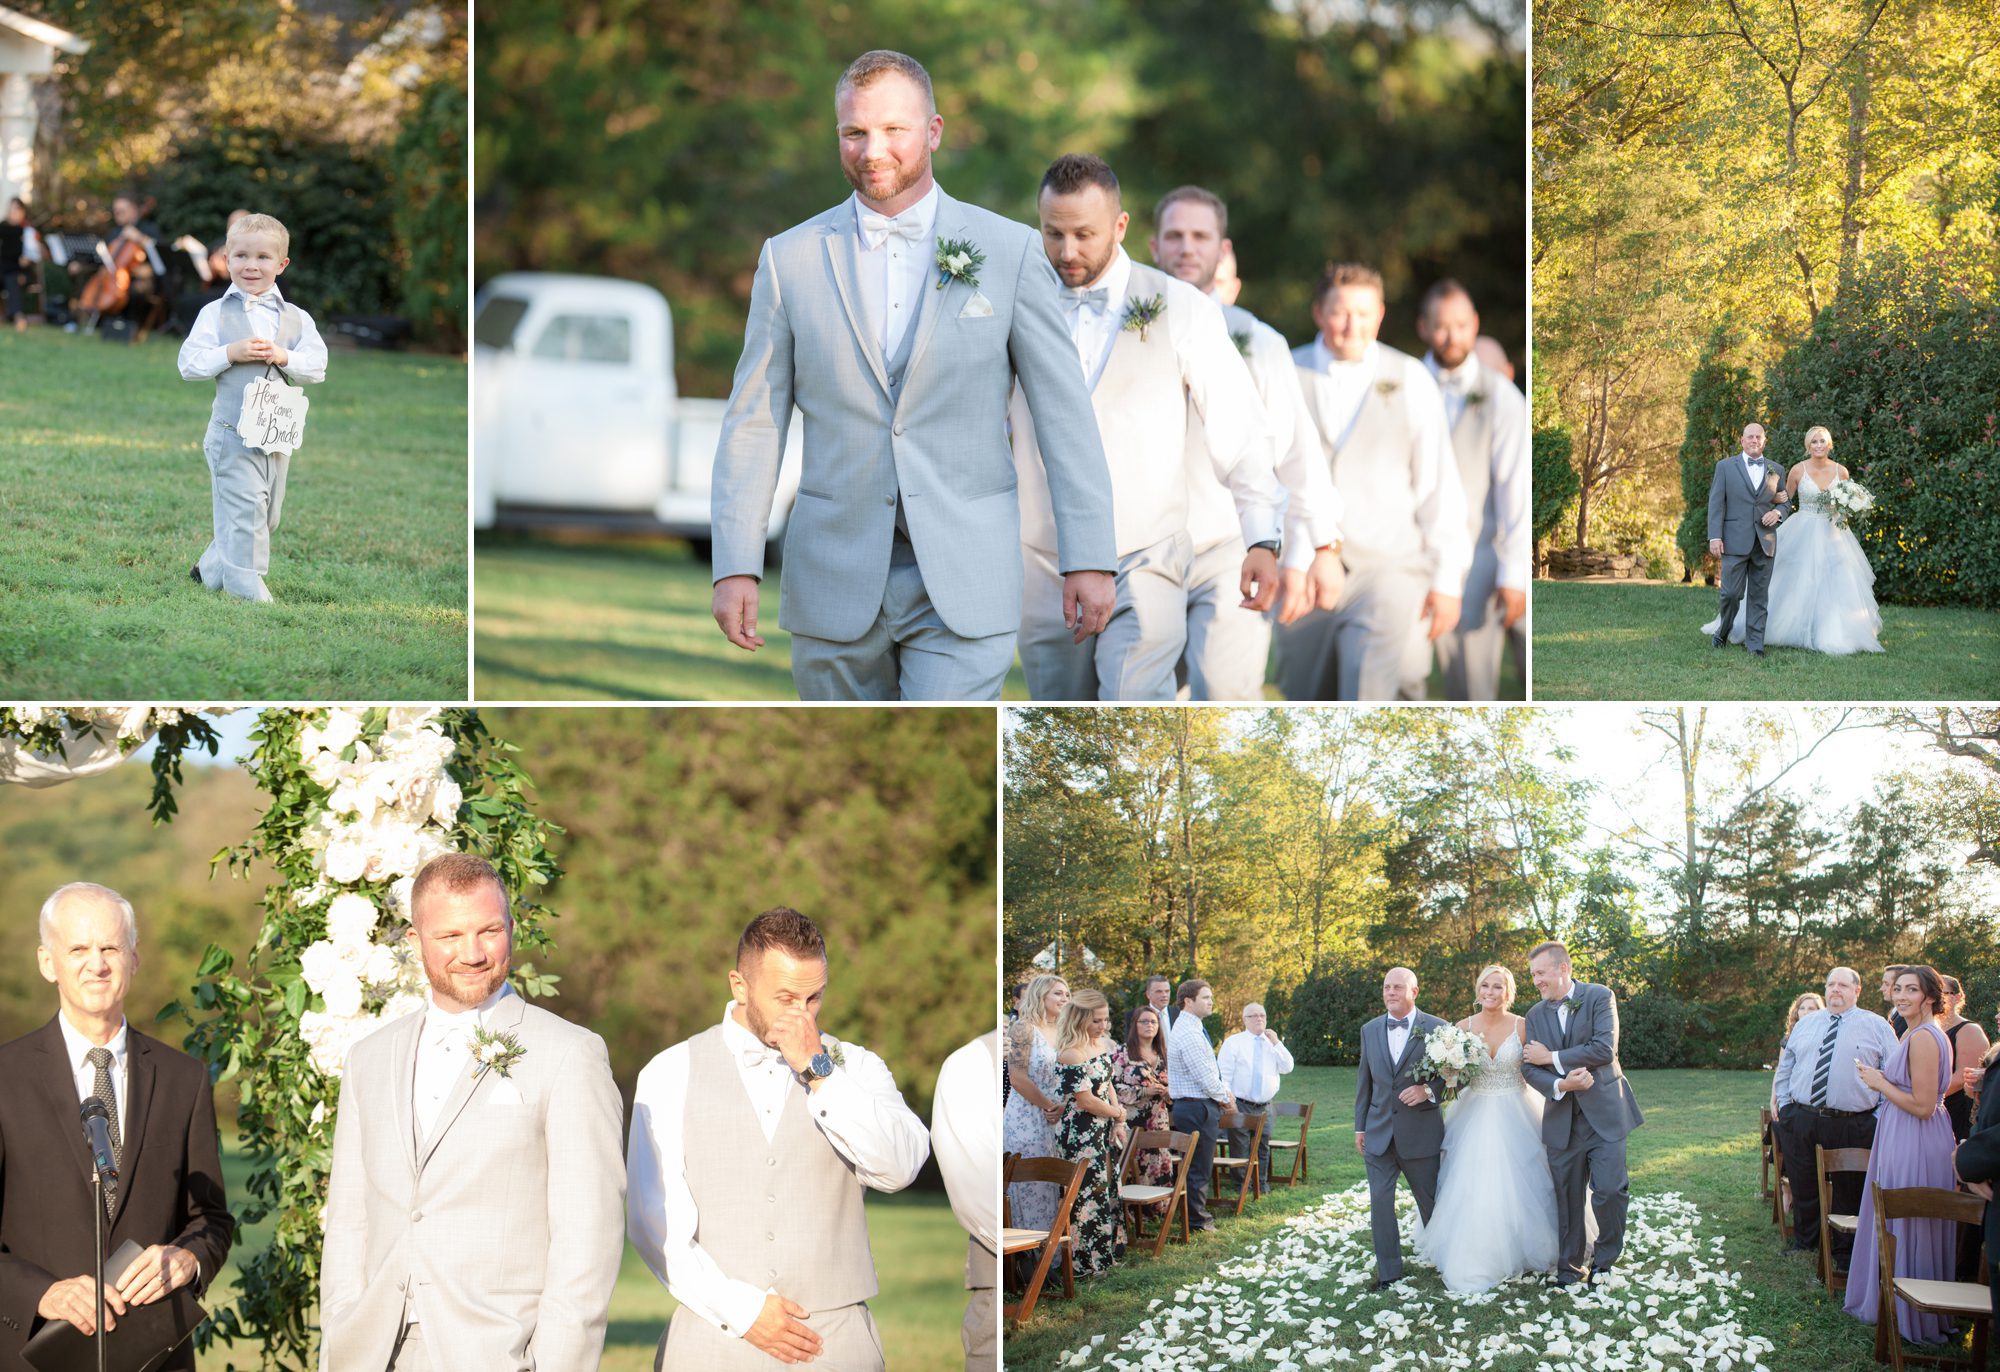 Summer wedding ceremony details. Wedding photography at Cedarwood Weddings and Estate in Nashville, TN photography by Krista Lee Photography